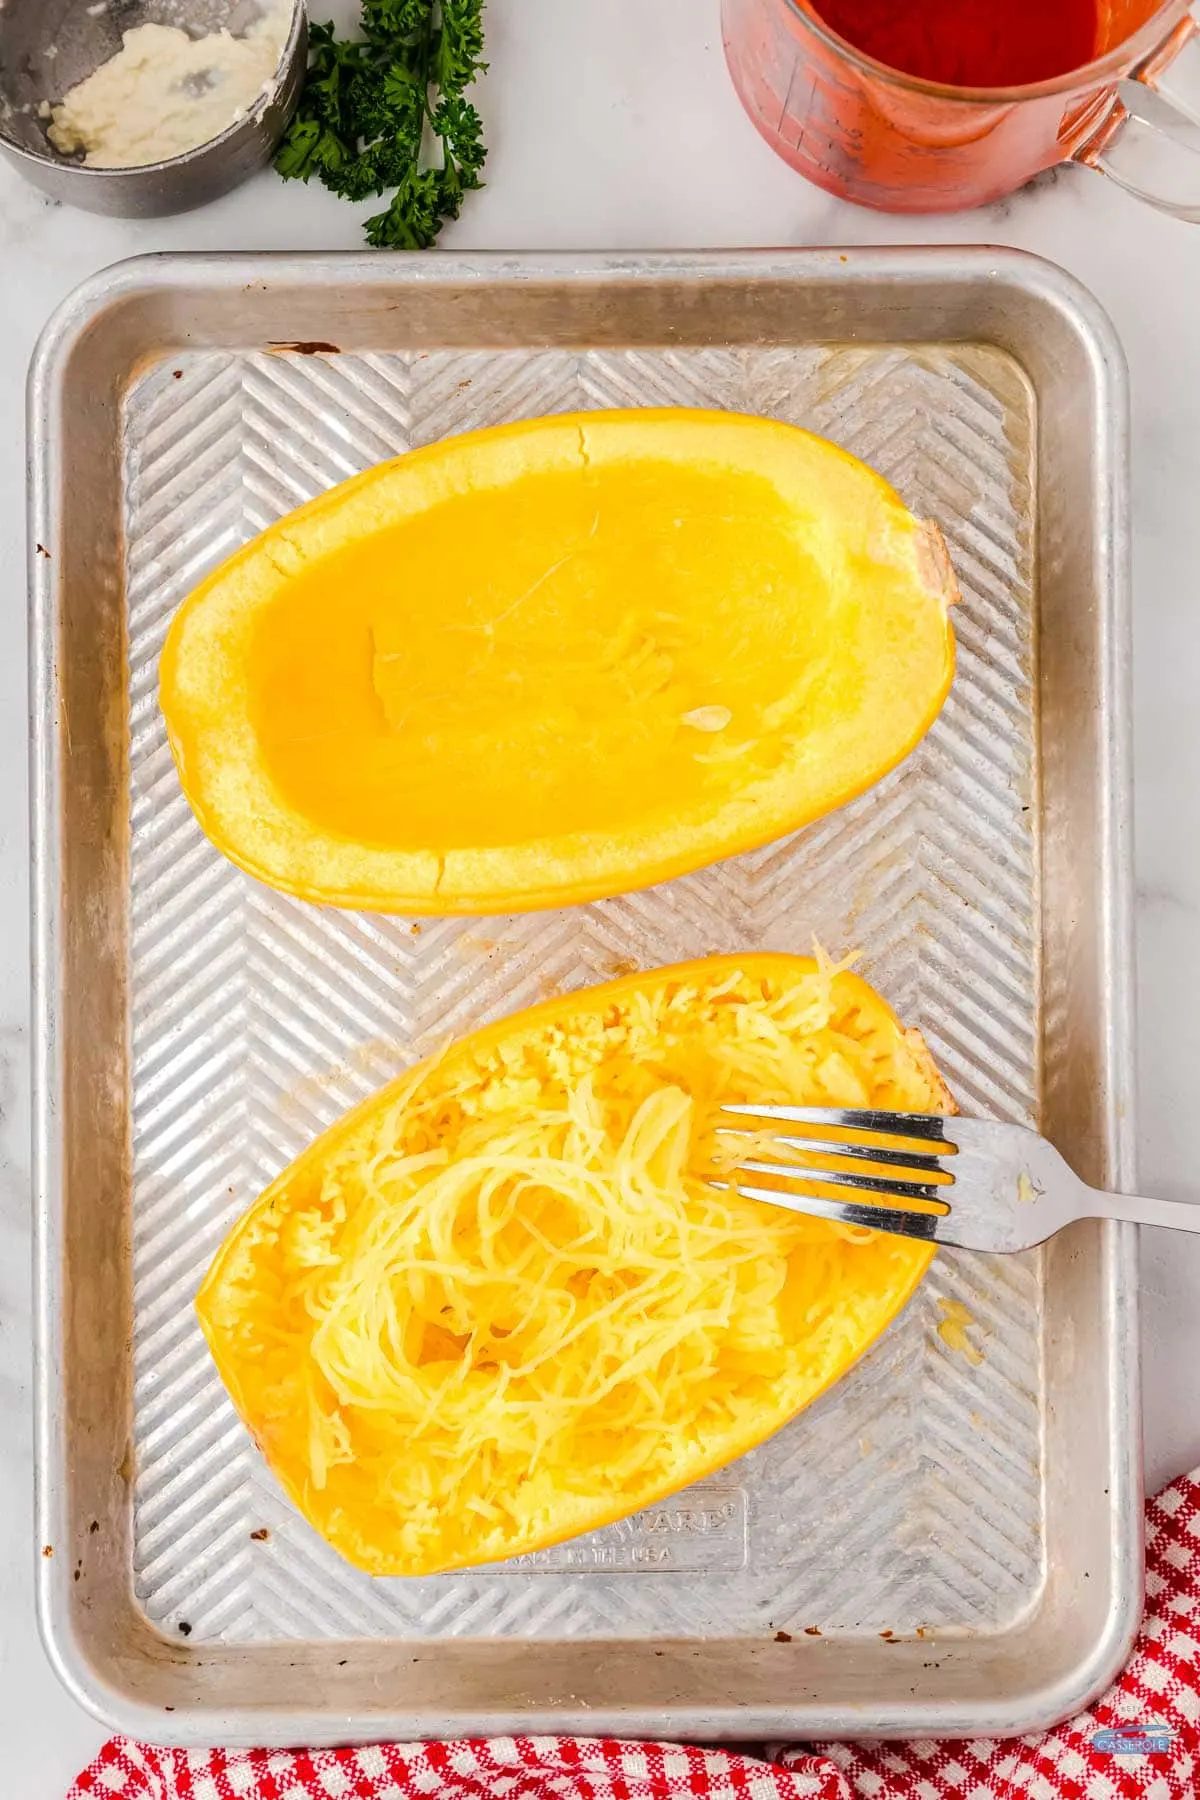 use a fork to remove the al dente strands and place in a bowl and cover with plastic wrap.